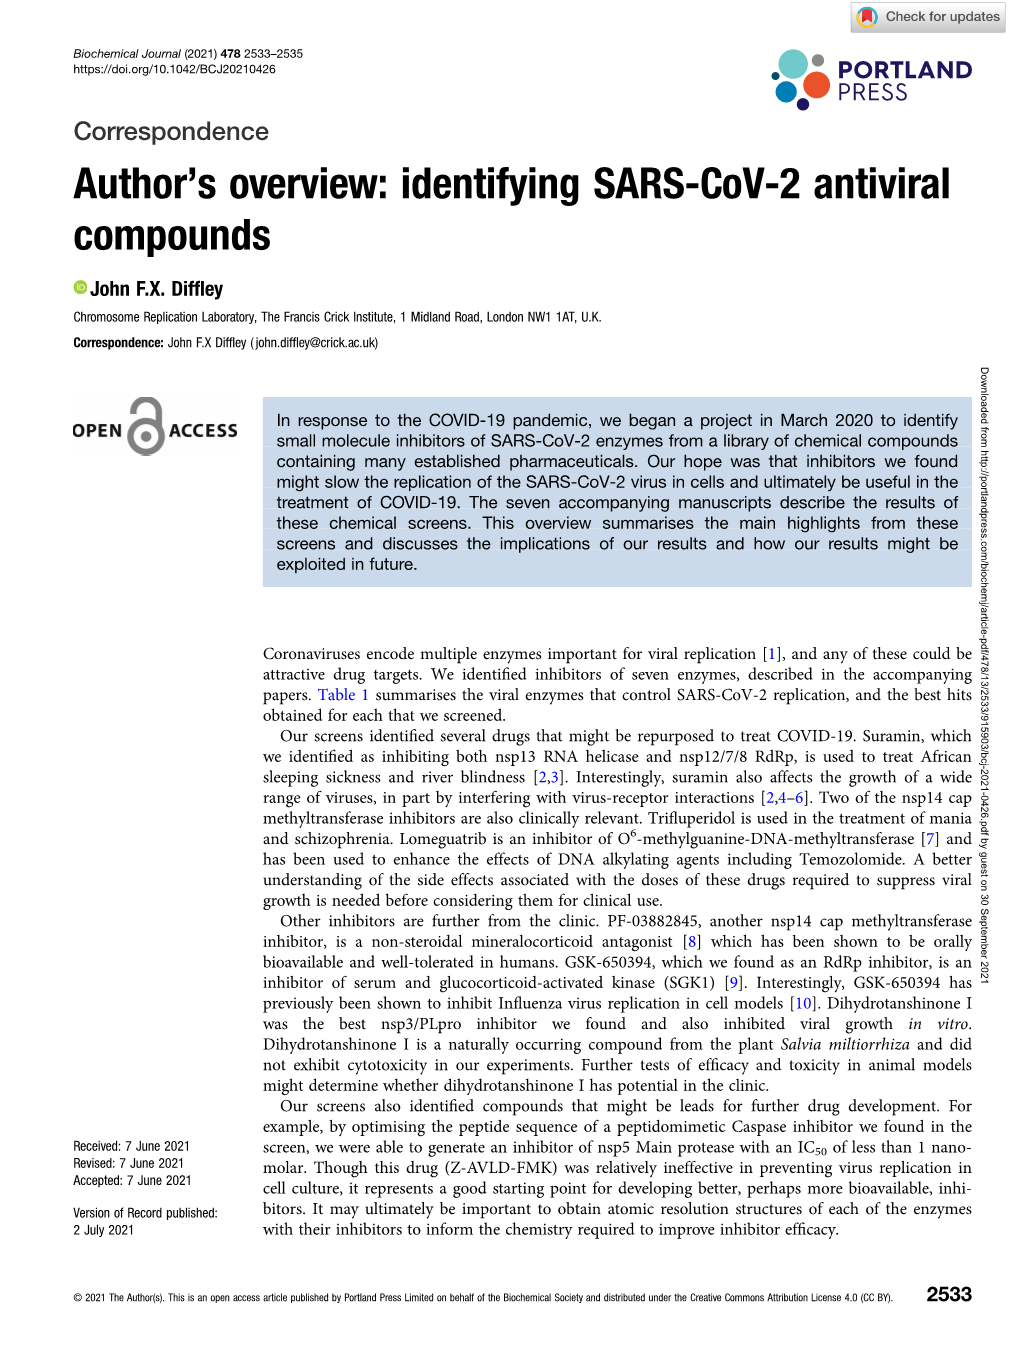 Identifying SARS-Cov-2 Antiviral Compounds